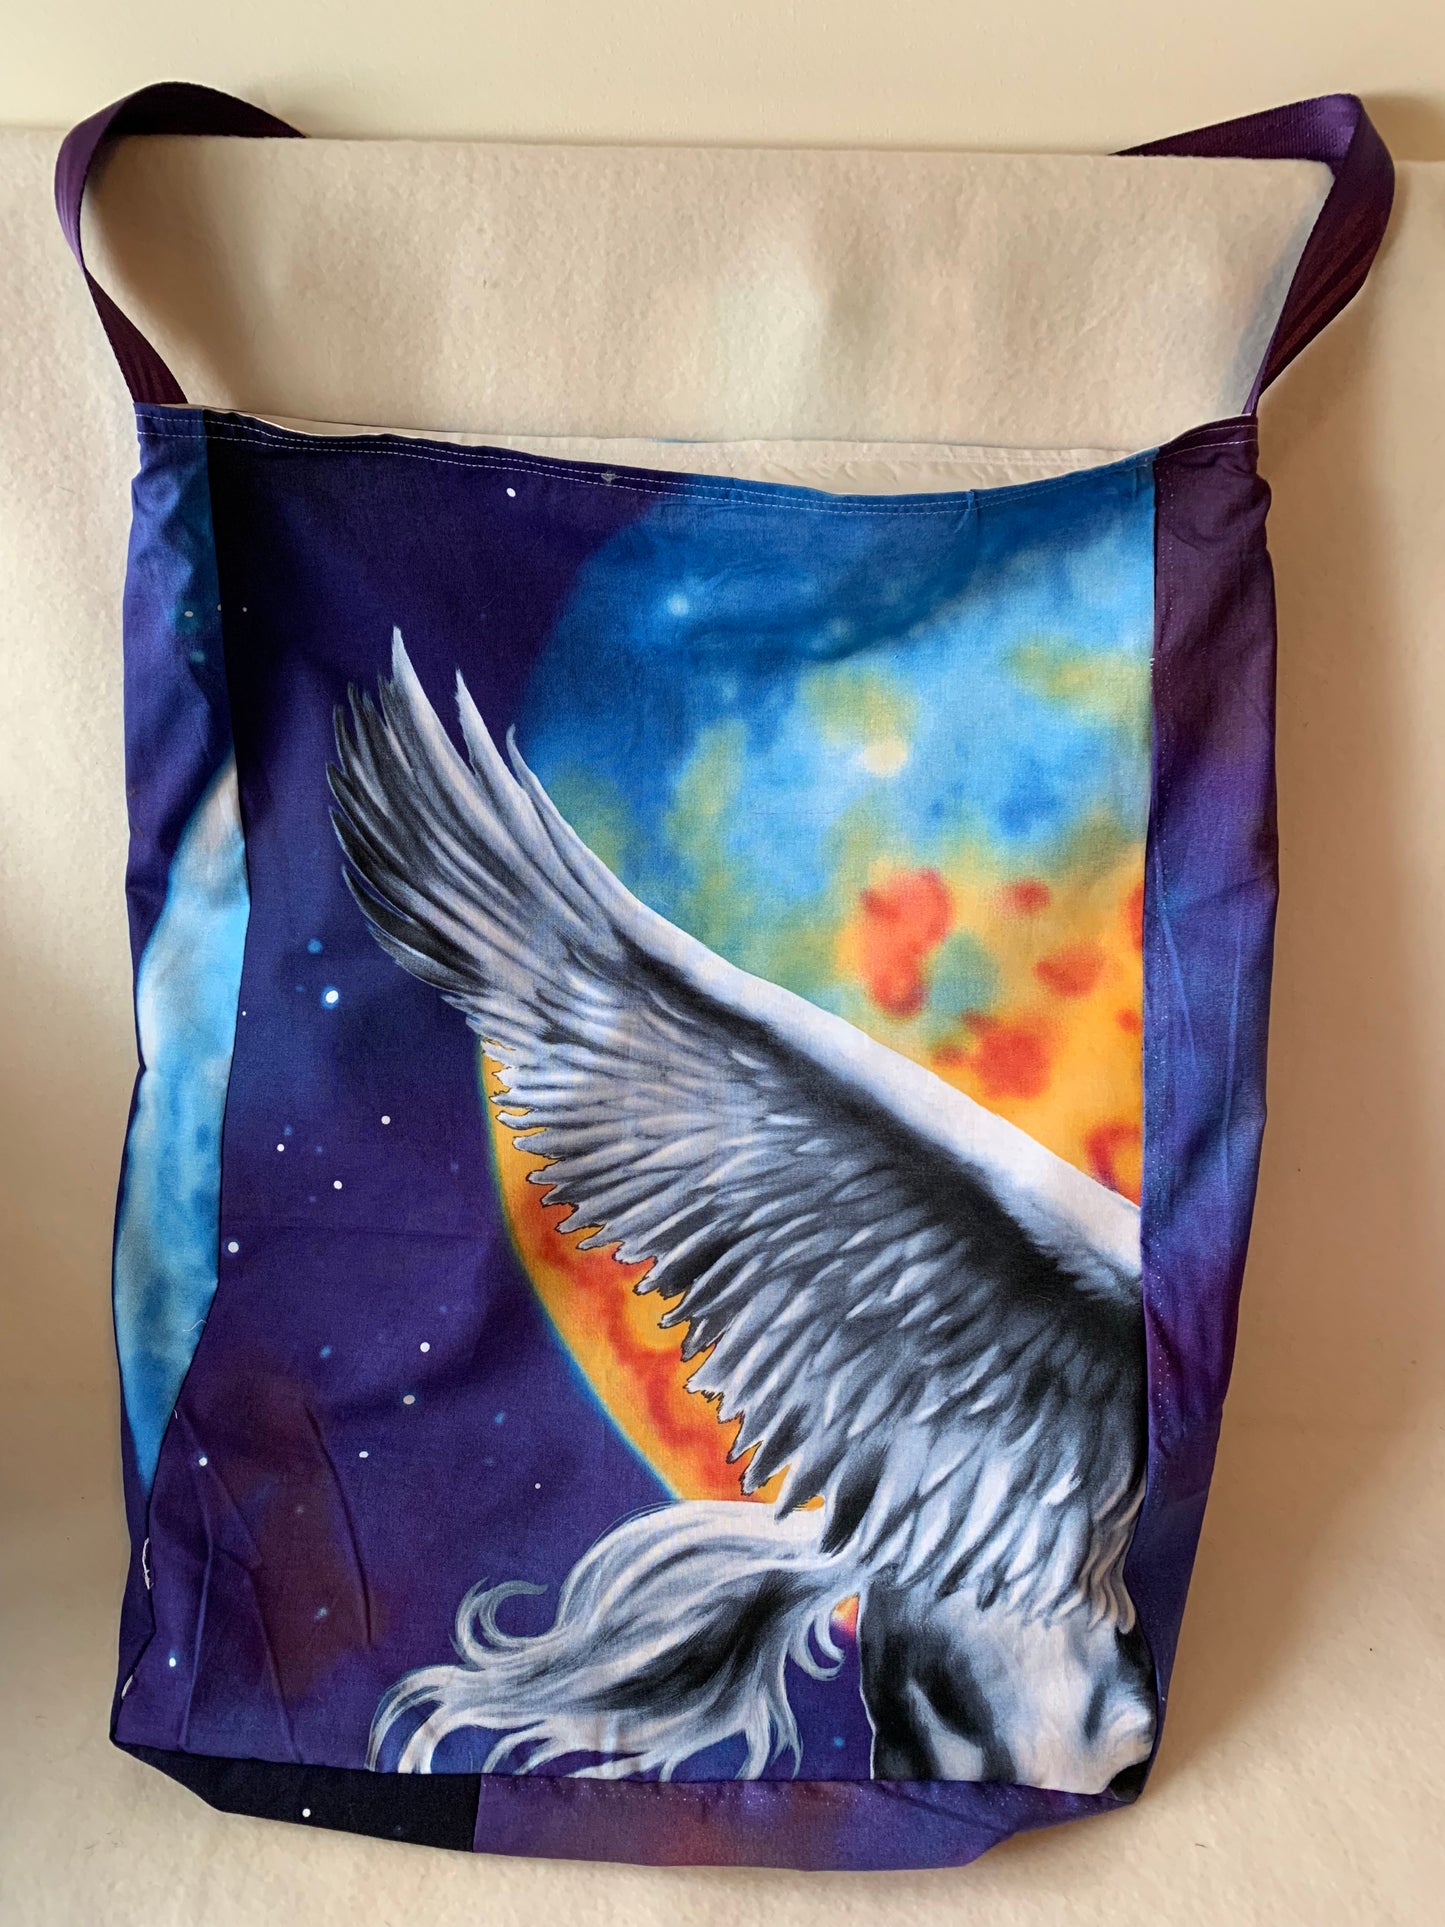 Extra large Tote bag in Pegasus cotton and heavy duty nylon lining with seat belt strap, moon & stars